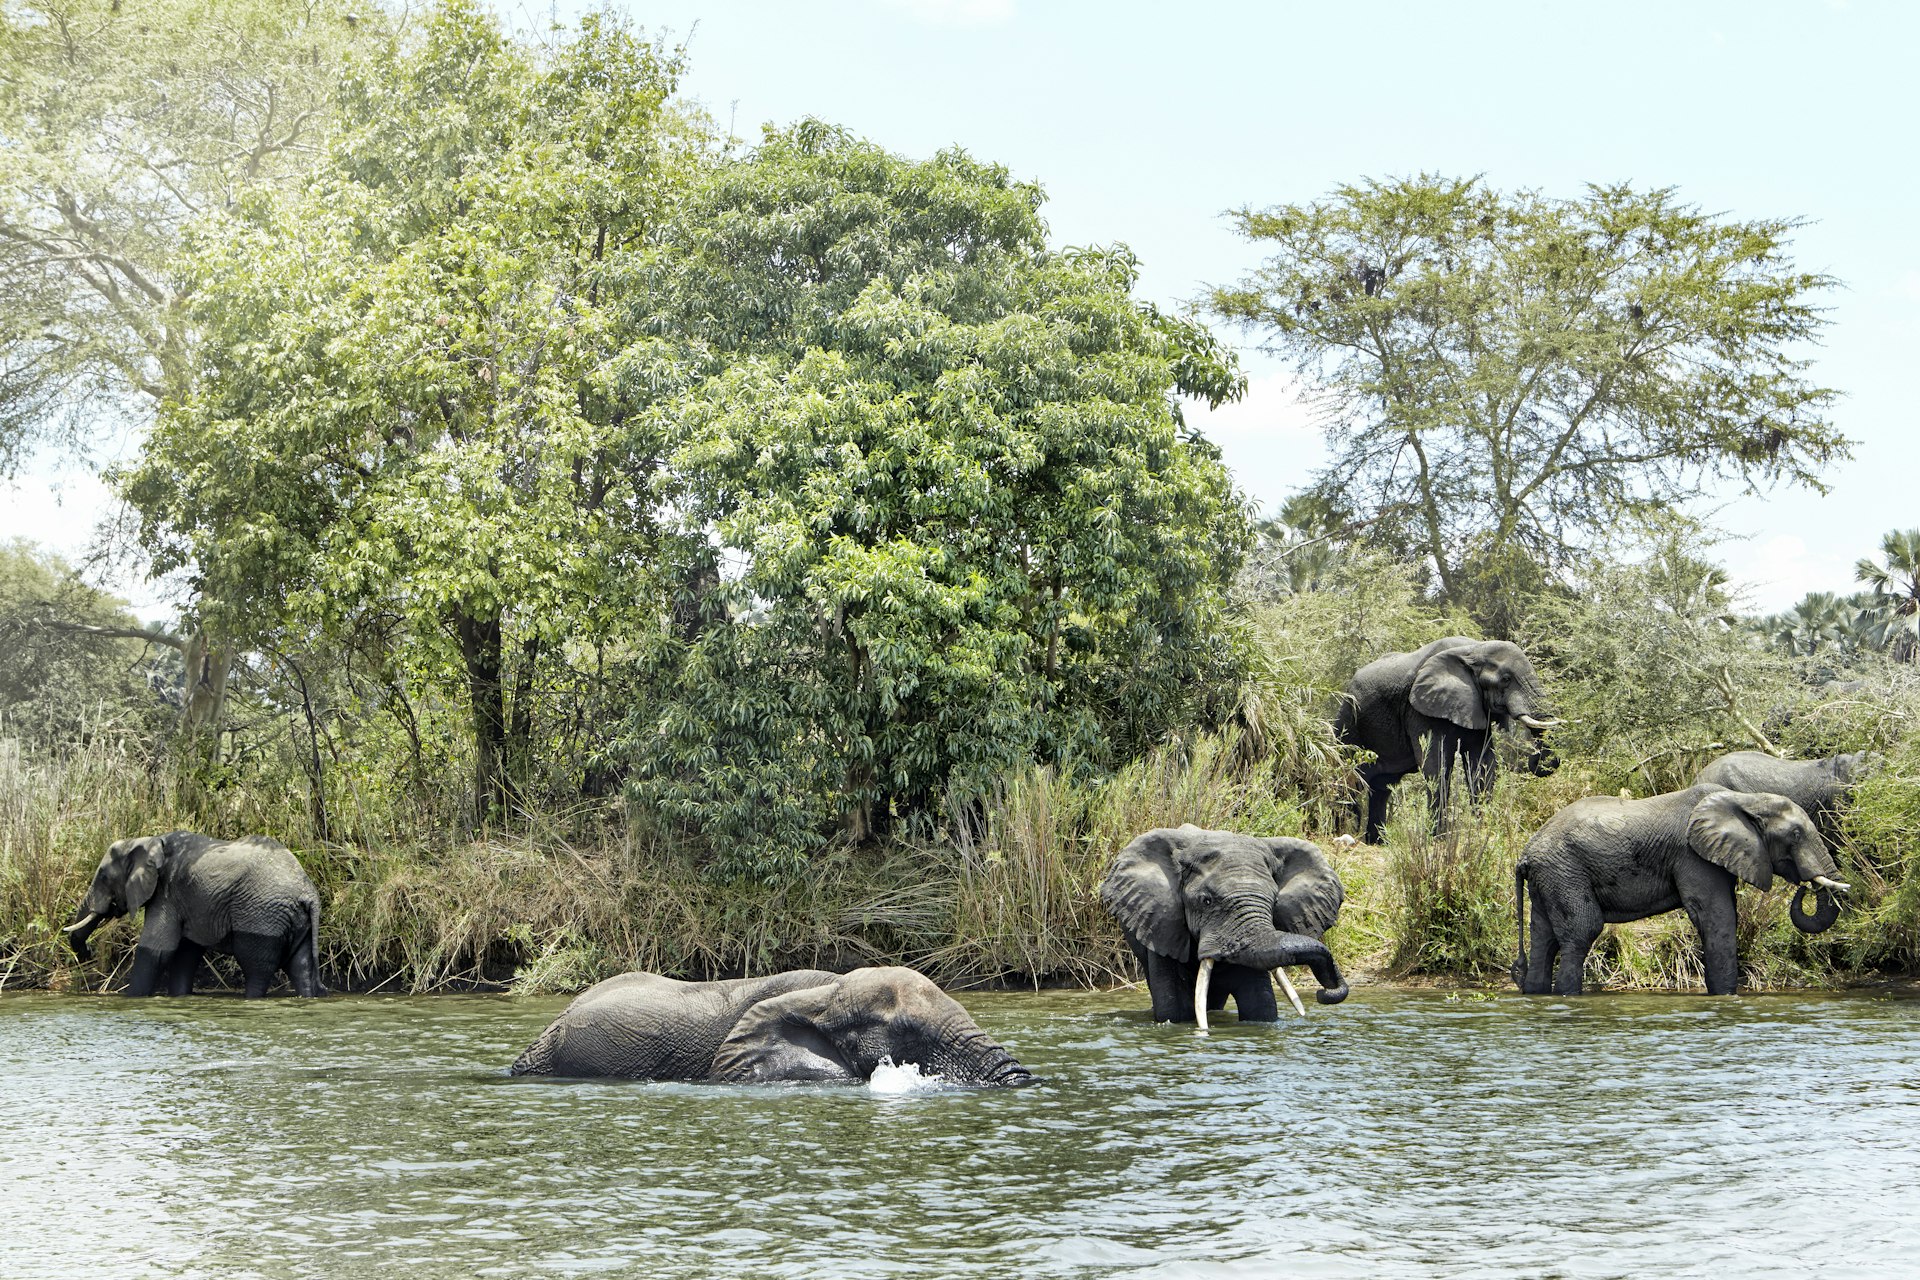 Large gray elephants stand beside or in the river, cooling down on a hot day